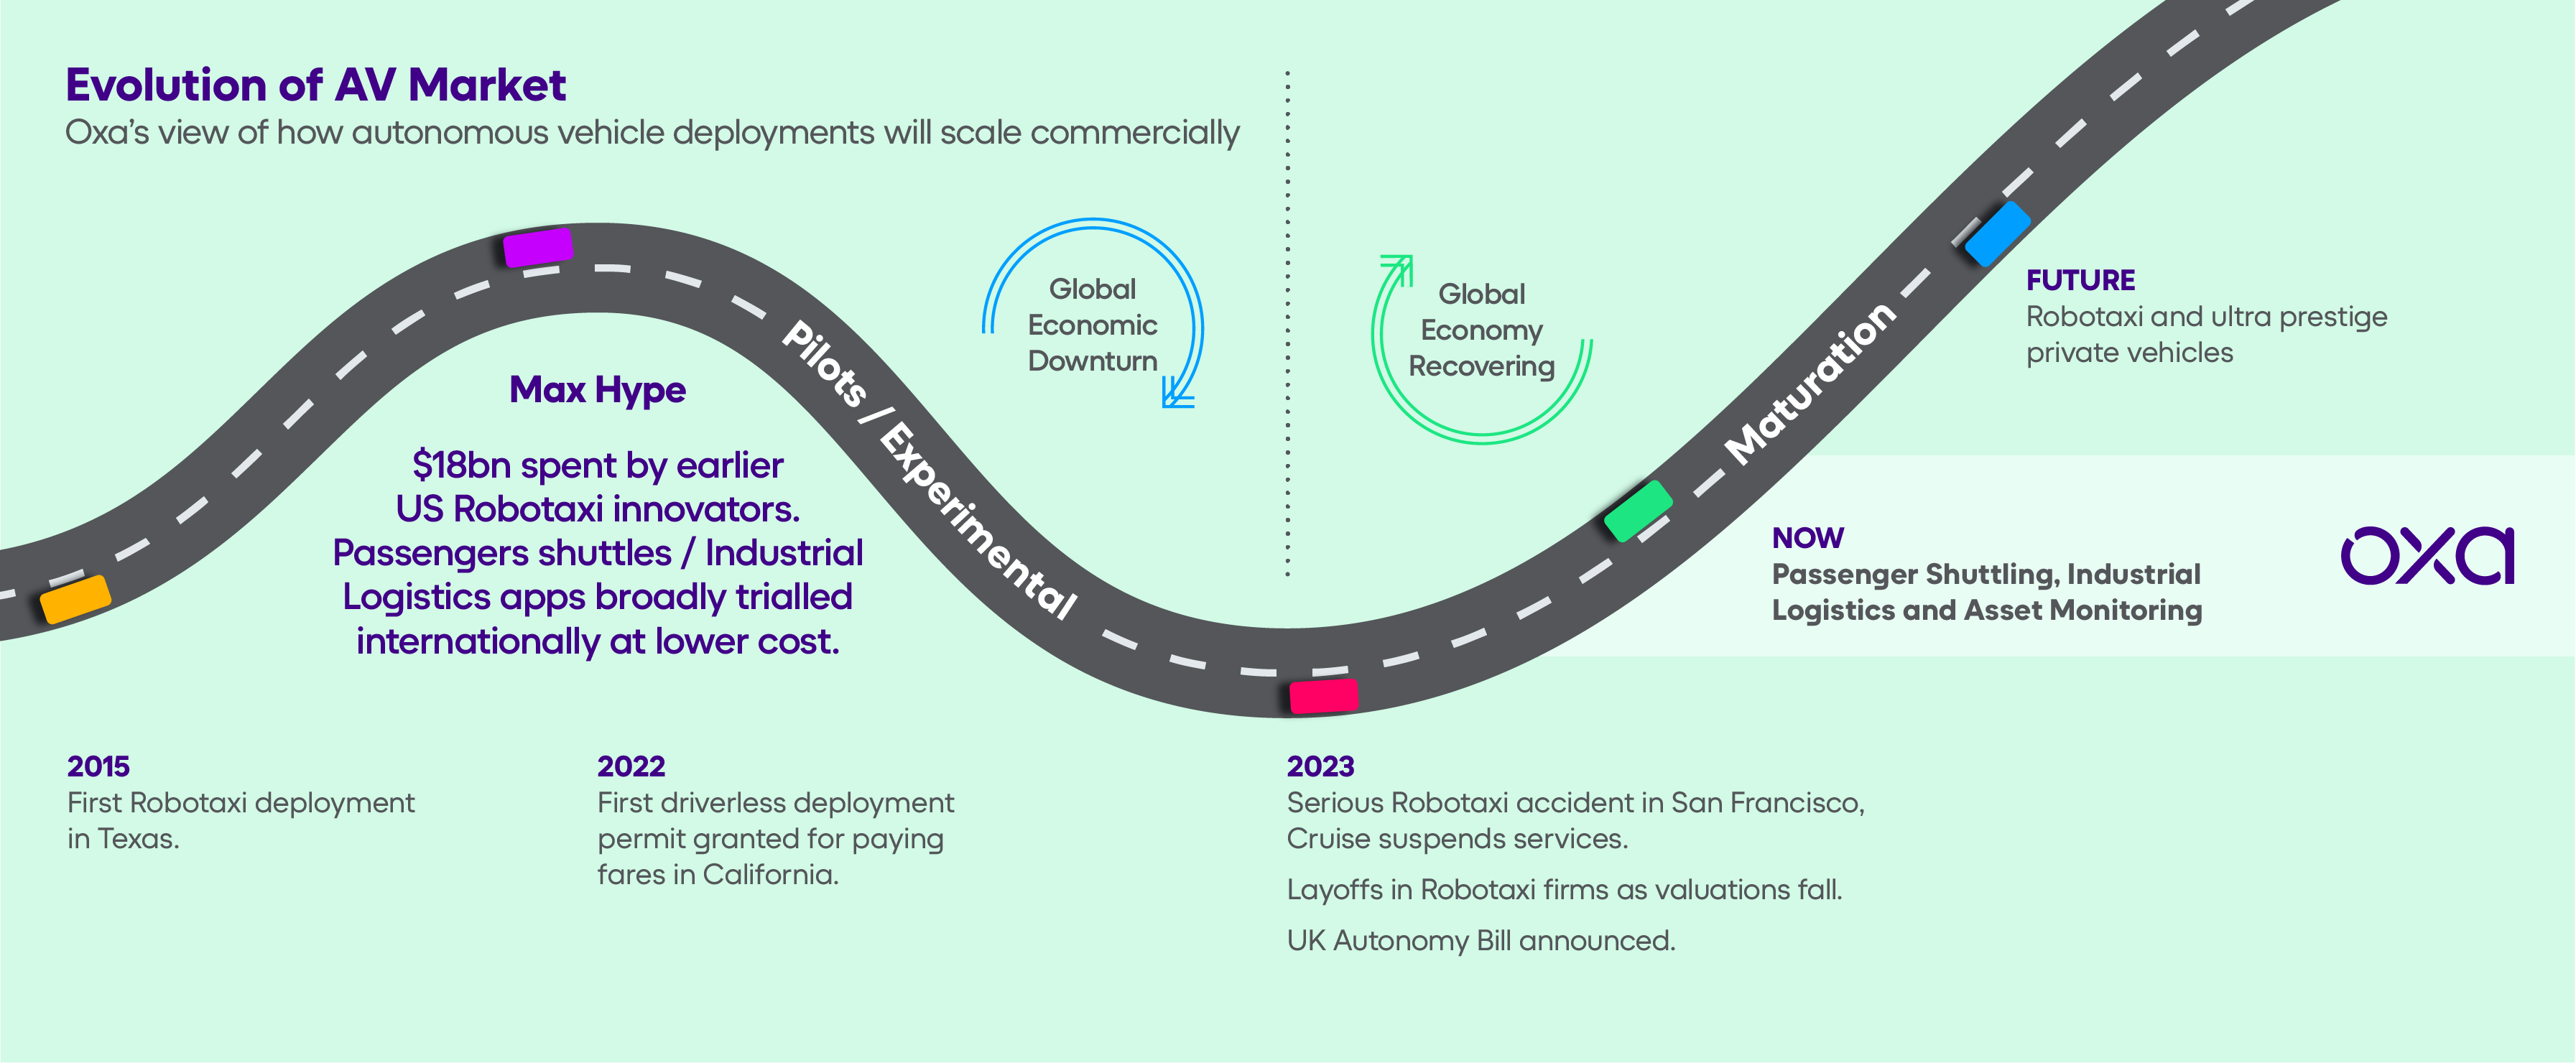 Oxa's view of how autonomous vehicle deployments will scale commercially